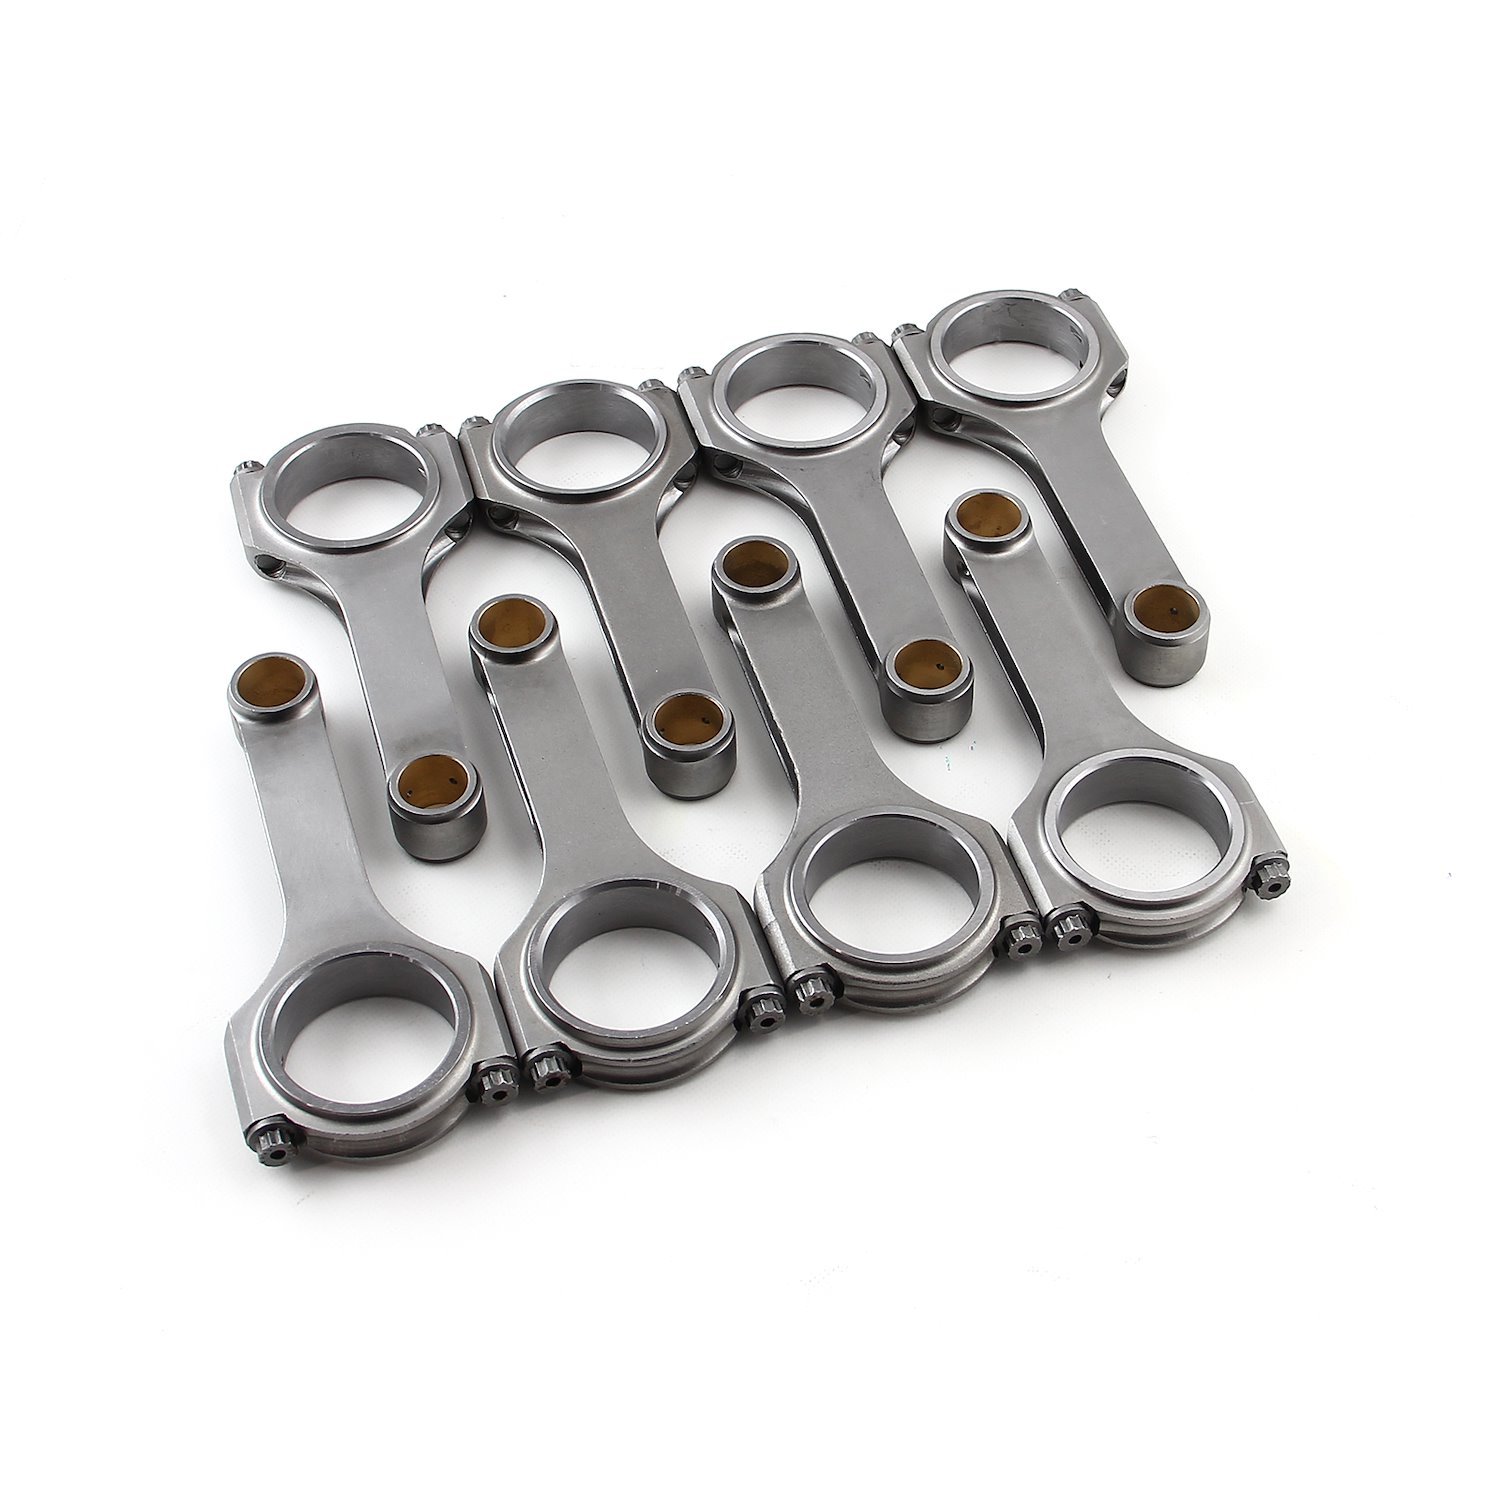 H-Beam Street/Strip Connecting Rods Ford 4.6L/Coyote